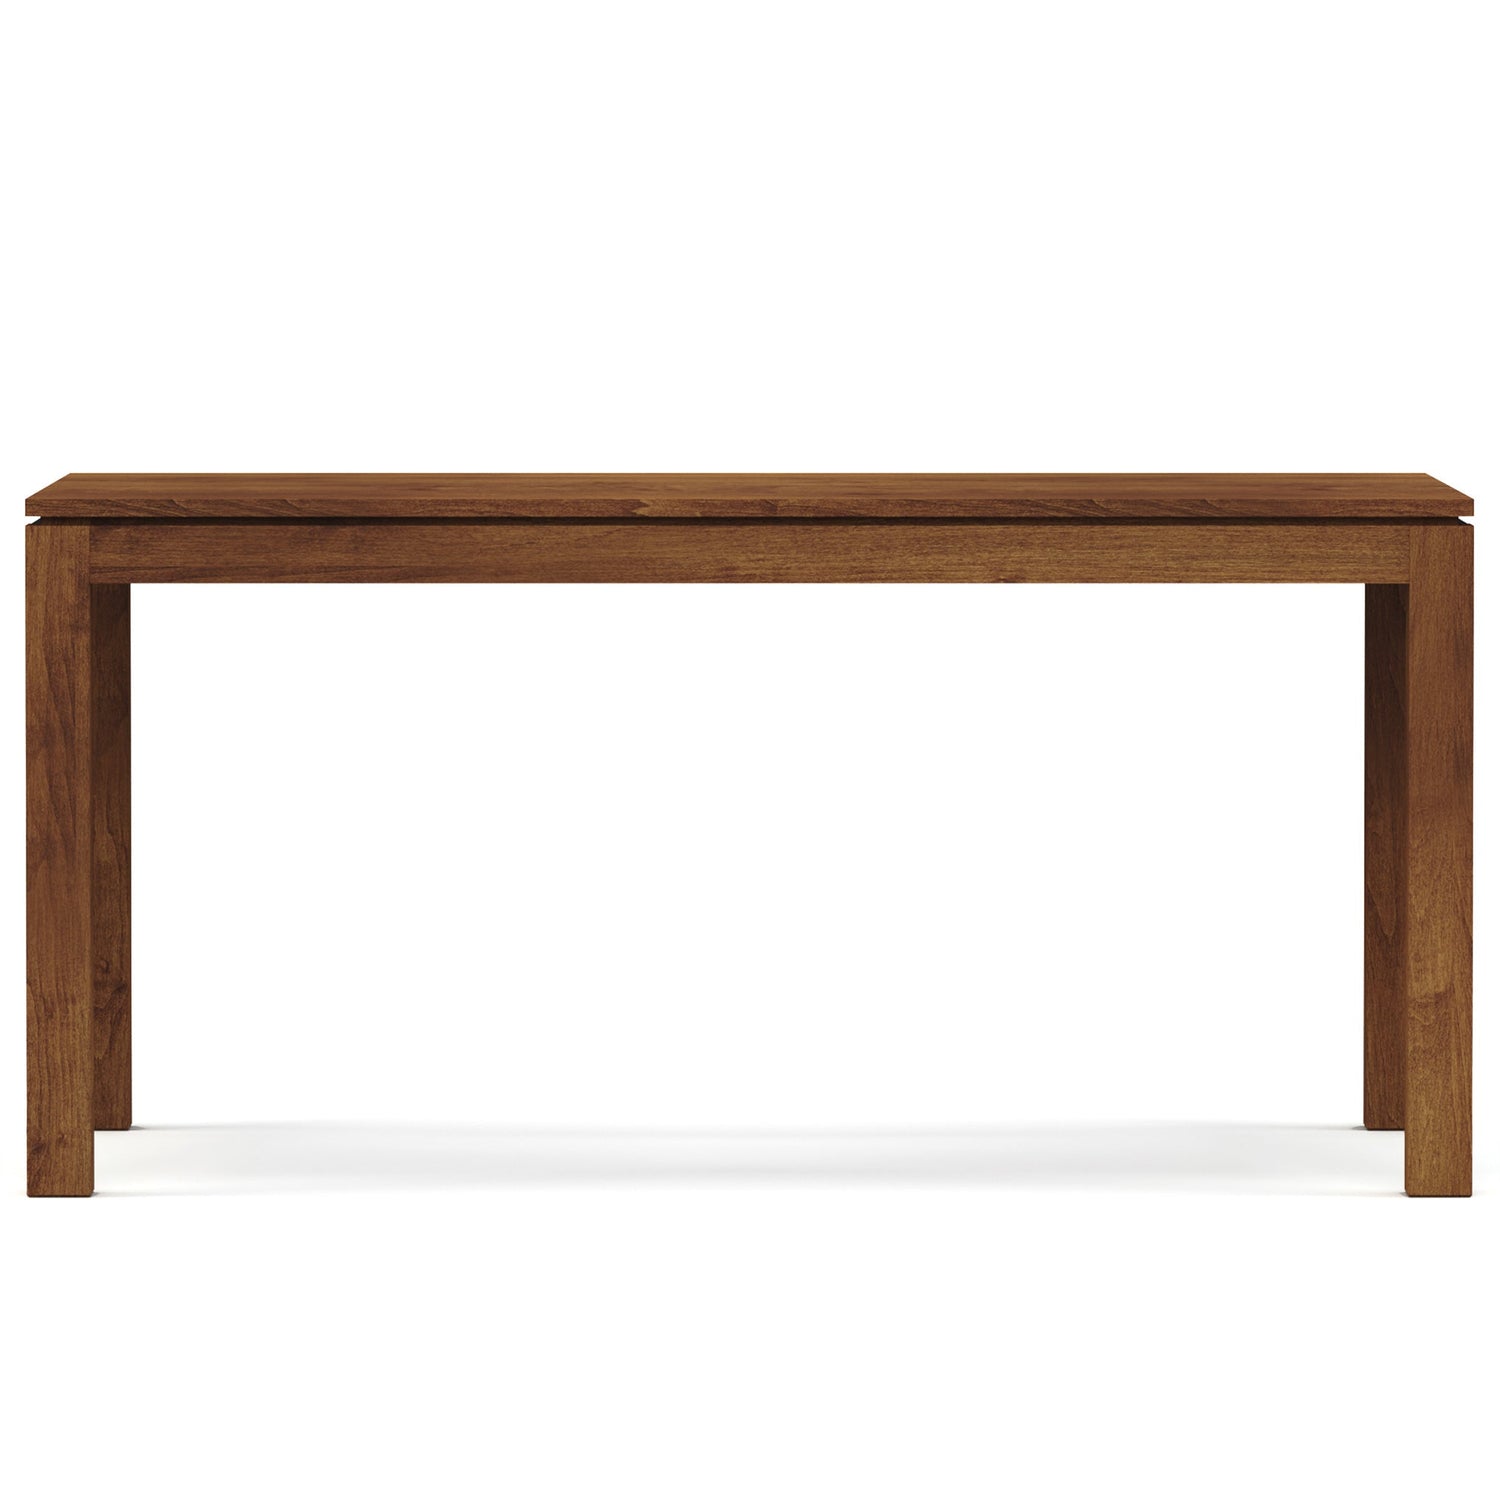 Dwyer 62-inch Dining Table